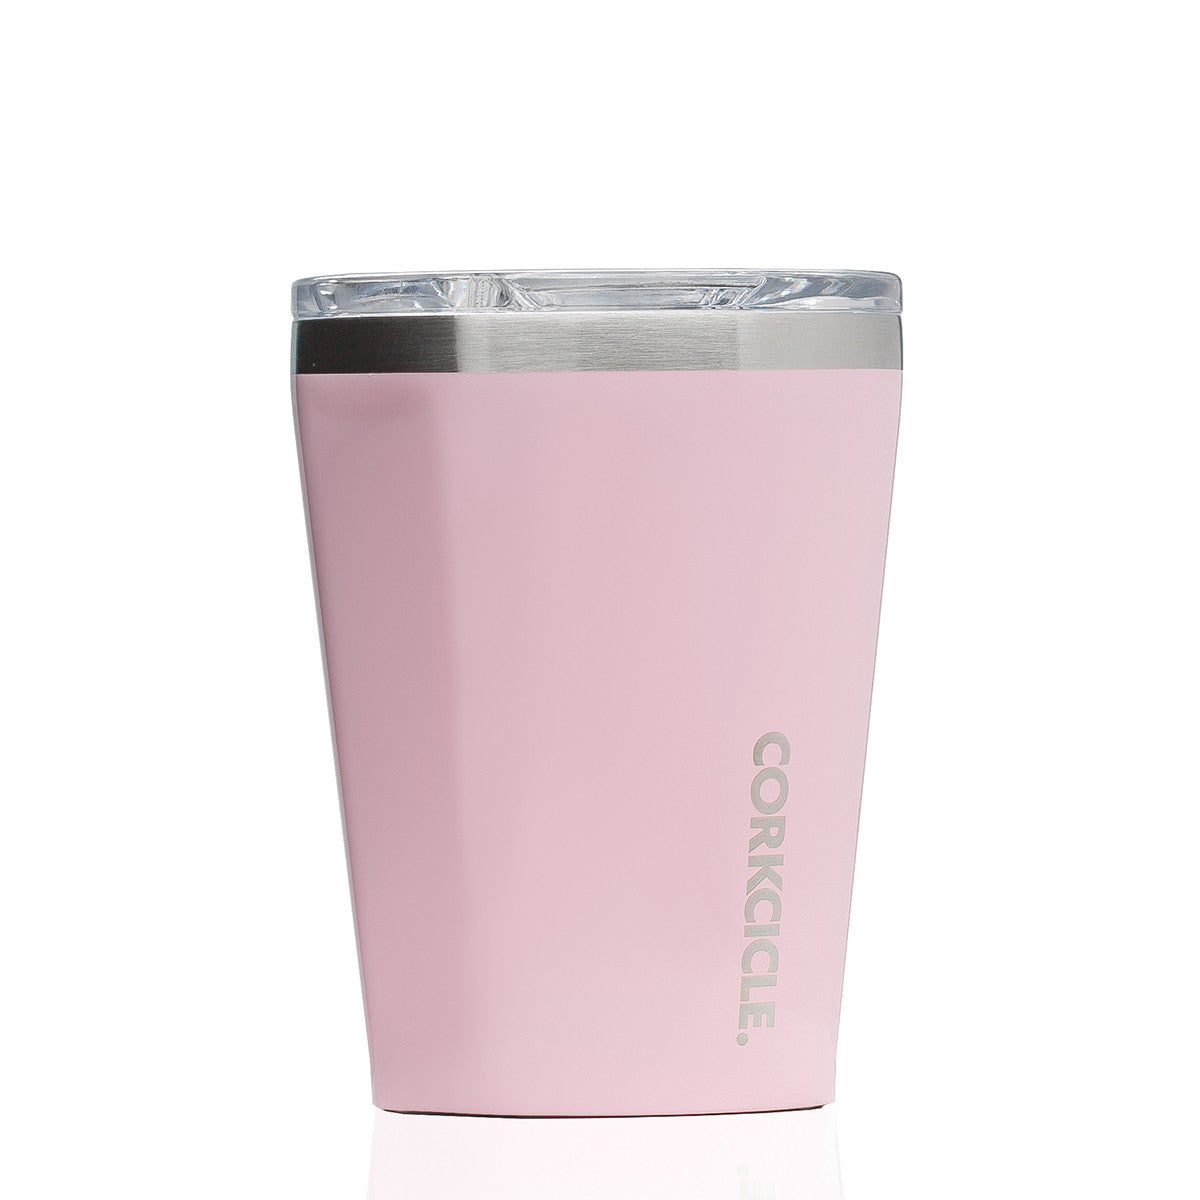 Corkcicle Classic Tumbler 355ml - Rose Quartz Insulated Stainless Steel Cup